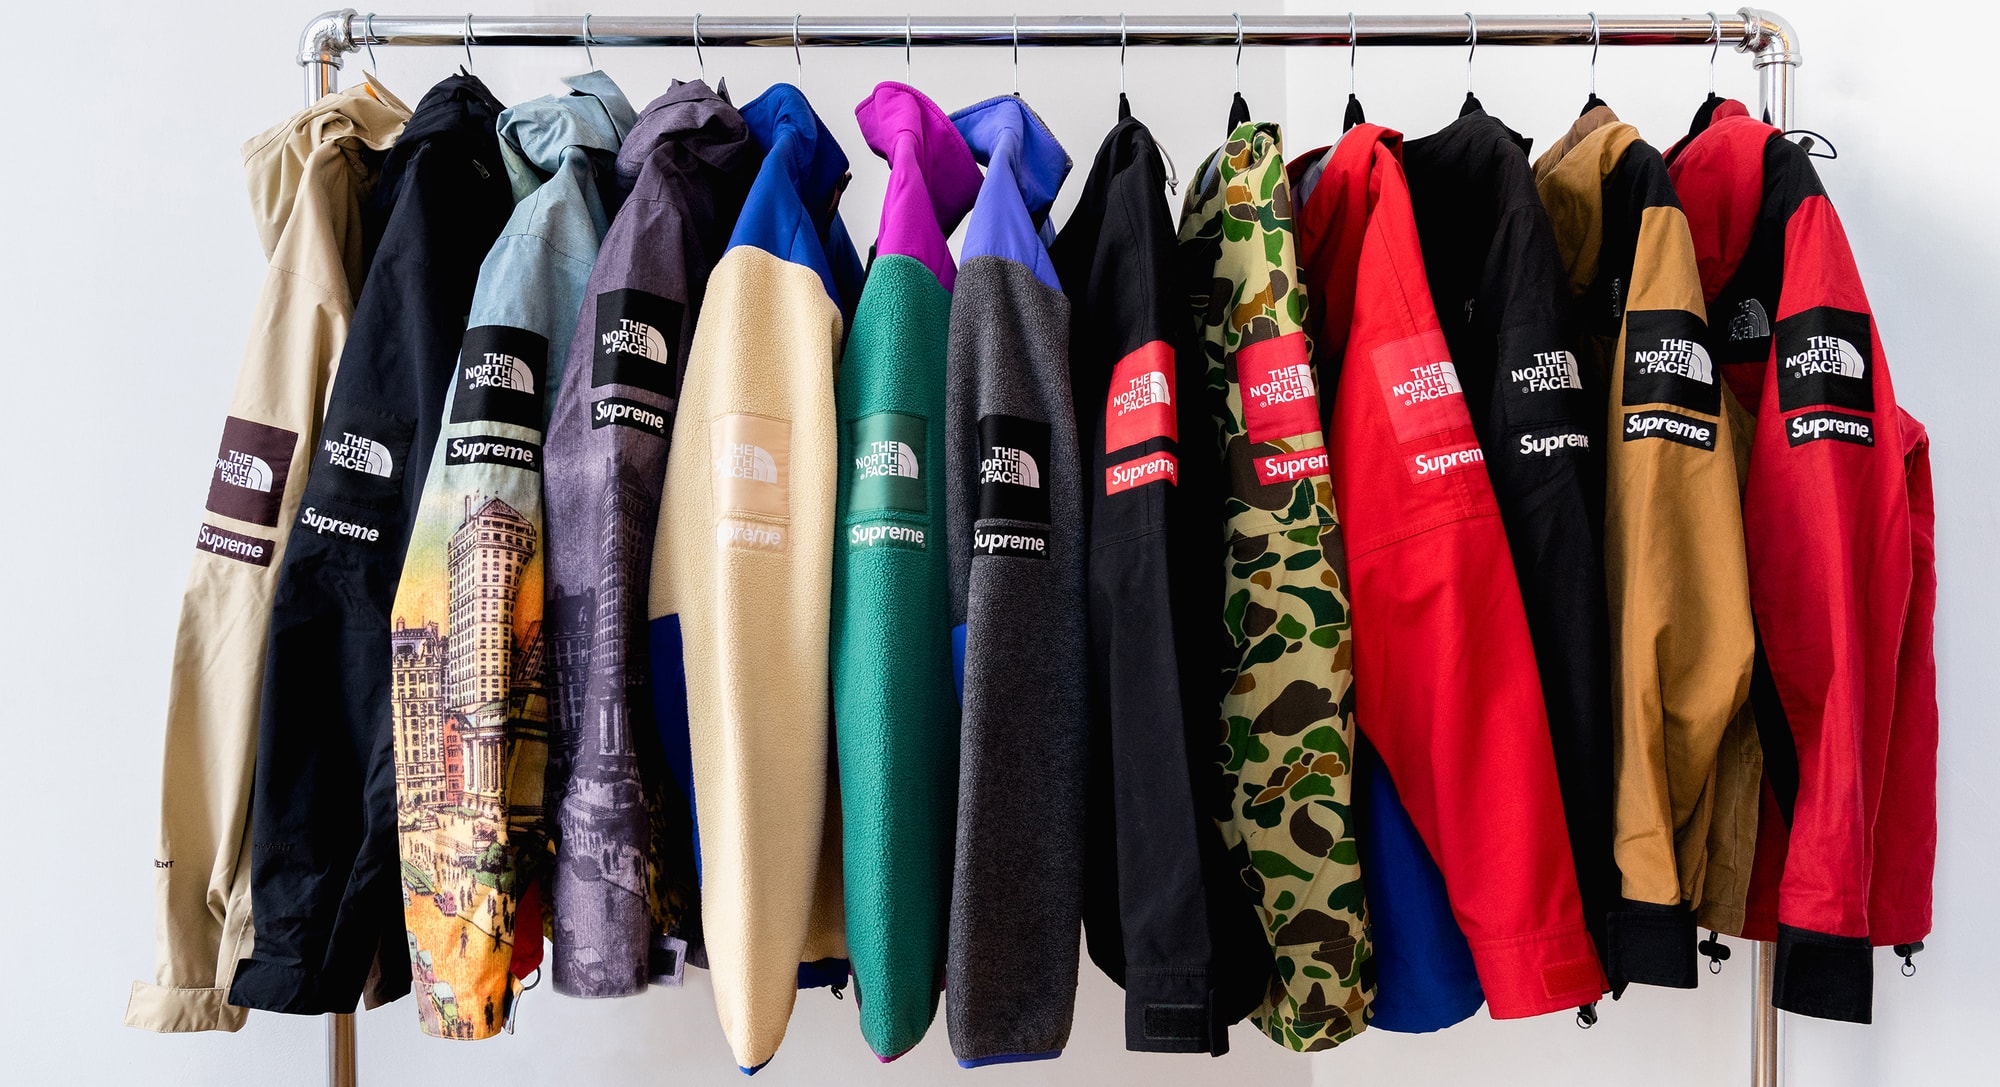 Peter Valles The North Face TNF Supreme Vans Comme des Garcons CDG sacai Collaborations Collabs Jackets Pants Outerwear Junya Watanabe mastermind Vans